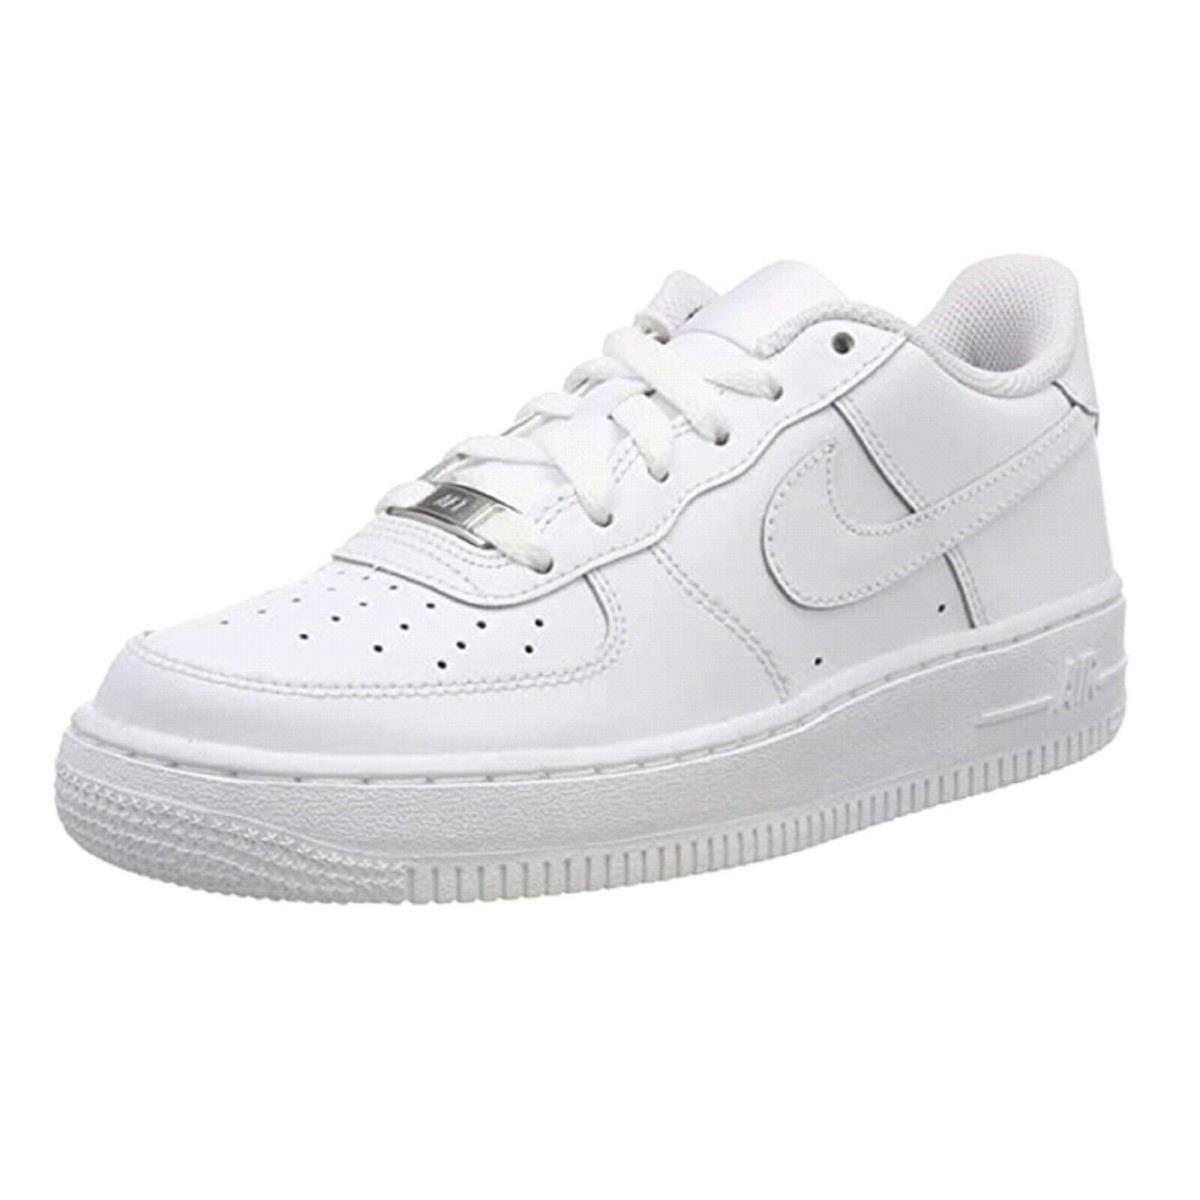 Nike Air Force 1 GS Youth Grade School Shoes